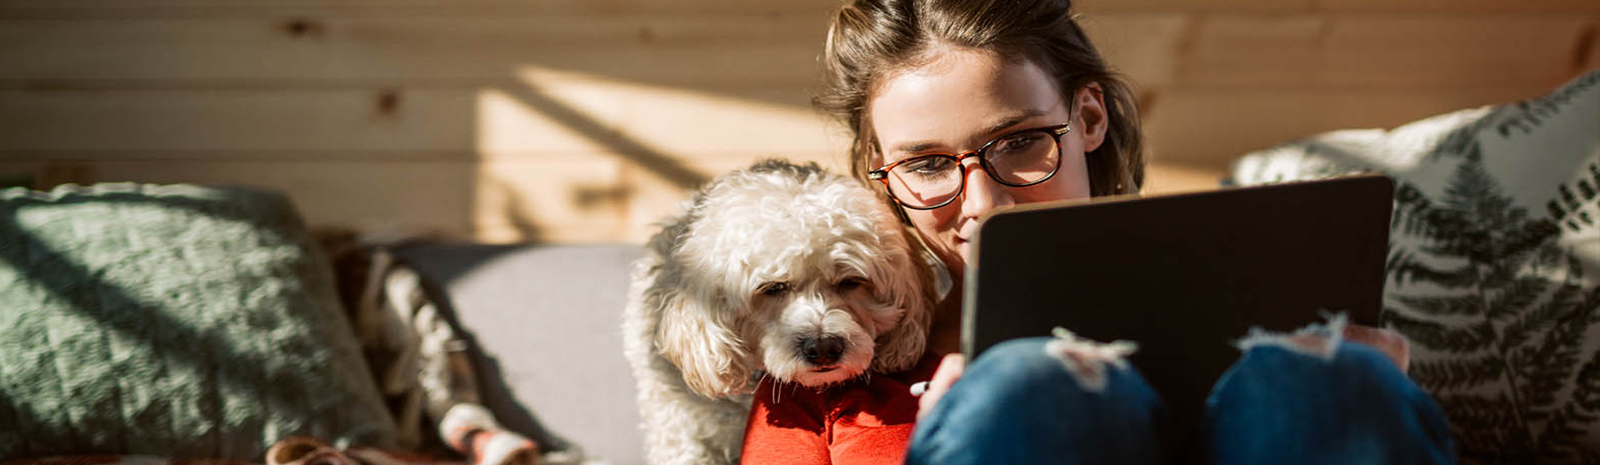 Woman holding laptop sits next to dog on couch.